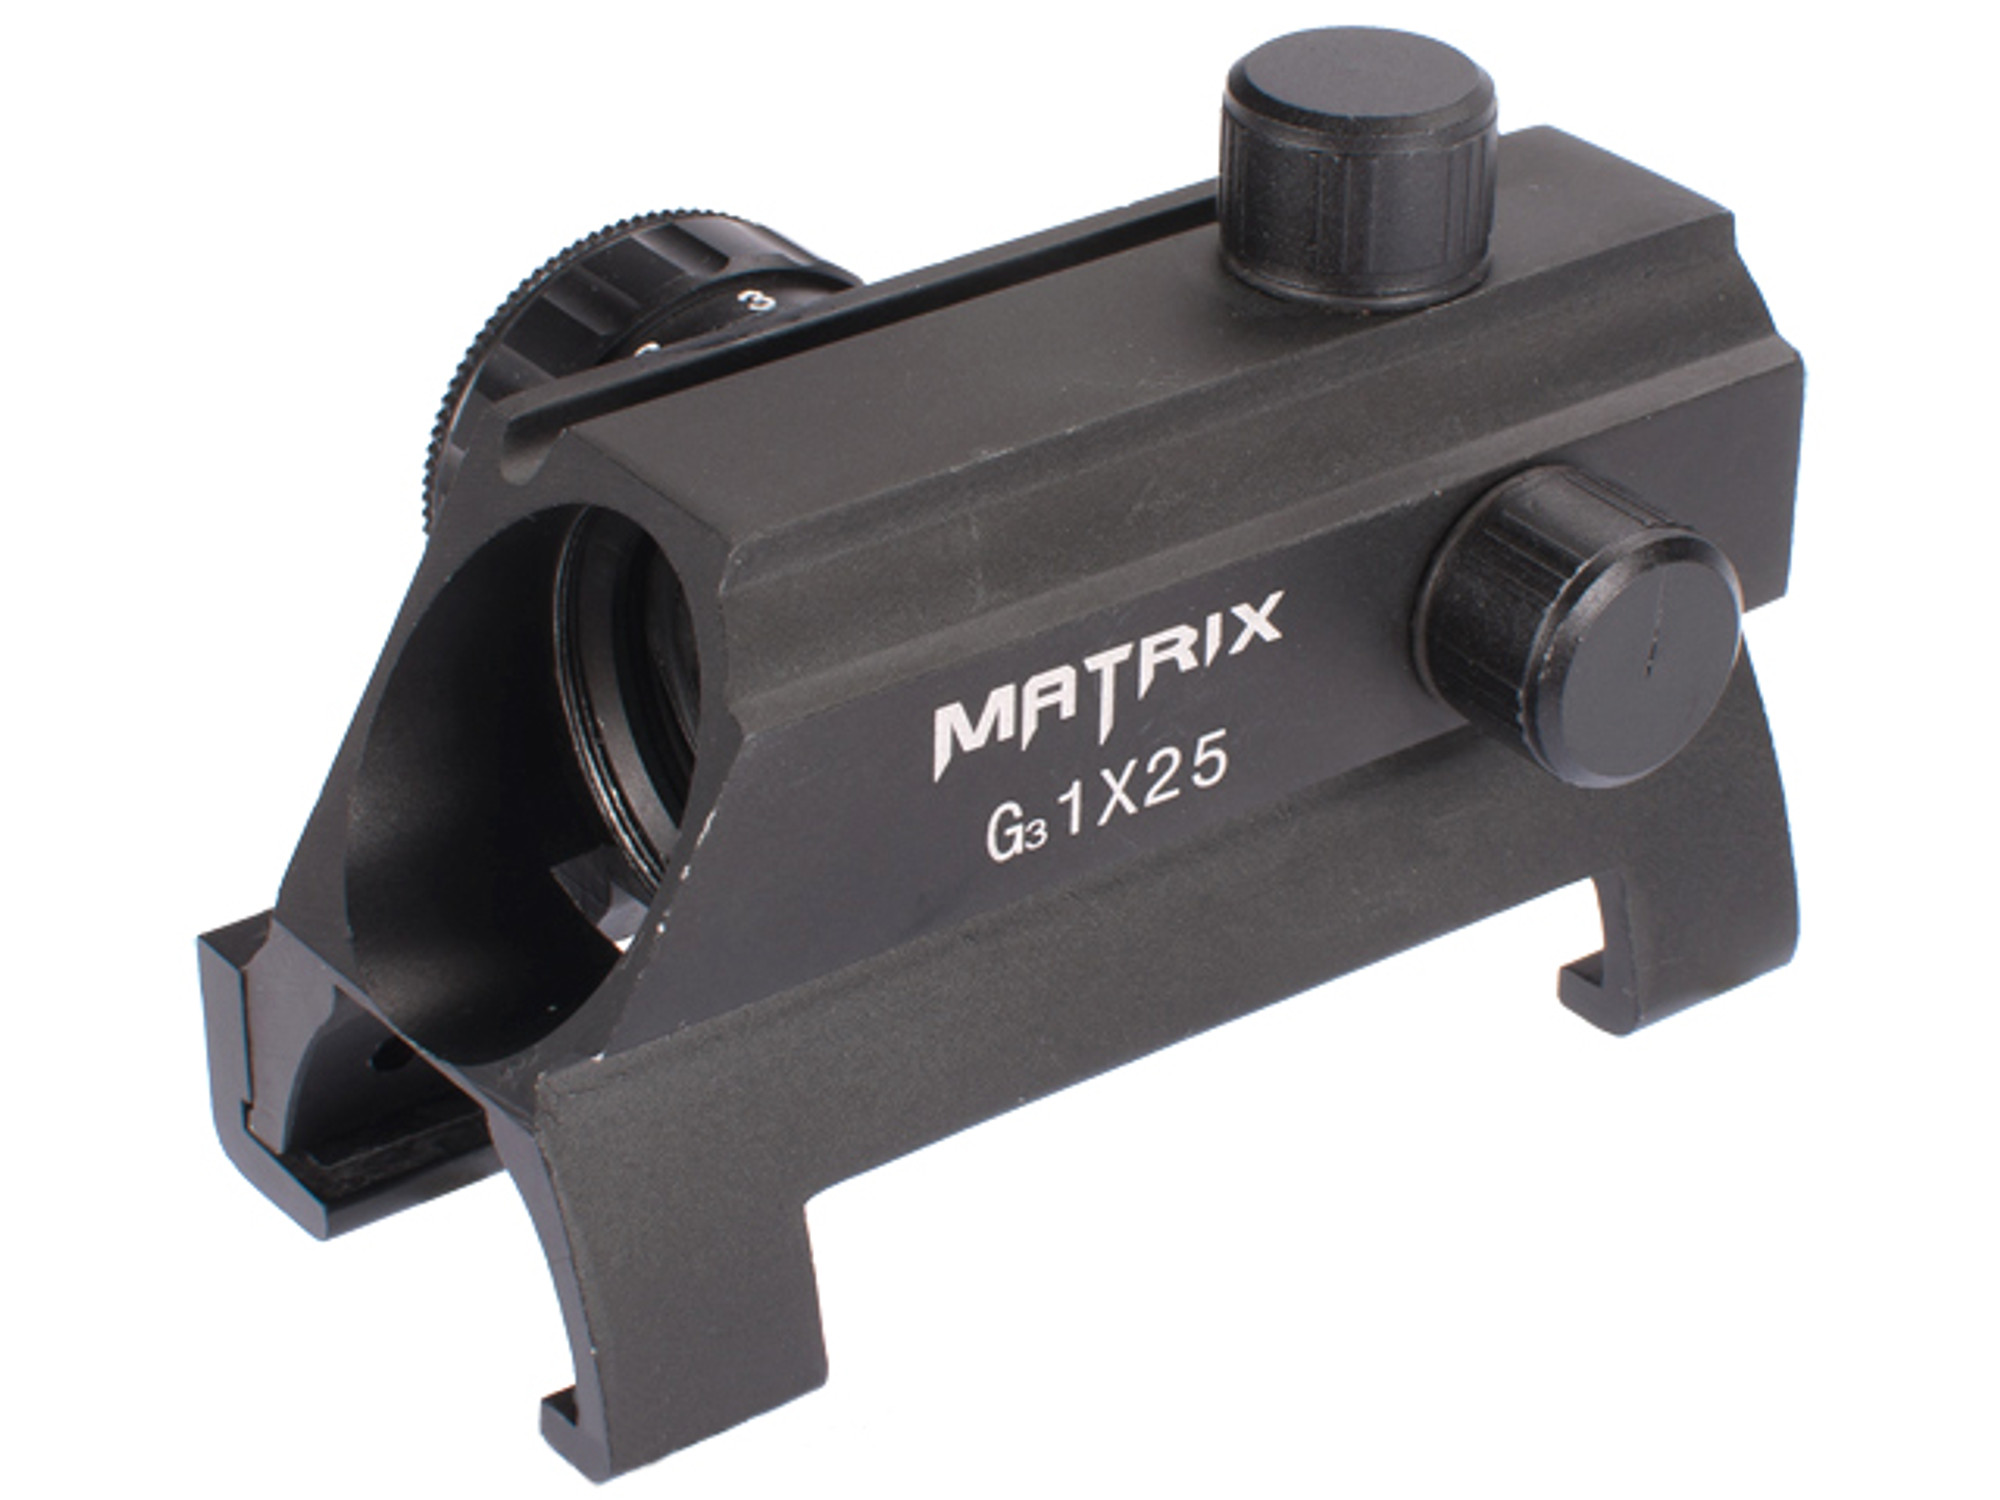 Matrix Real Steel Series Red & Green Dot Scope for HK MP5 G3 Series Rifles (Integrated Claw Mount)